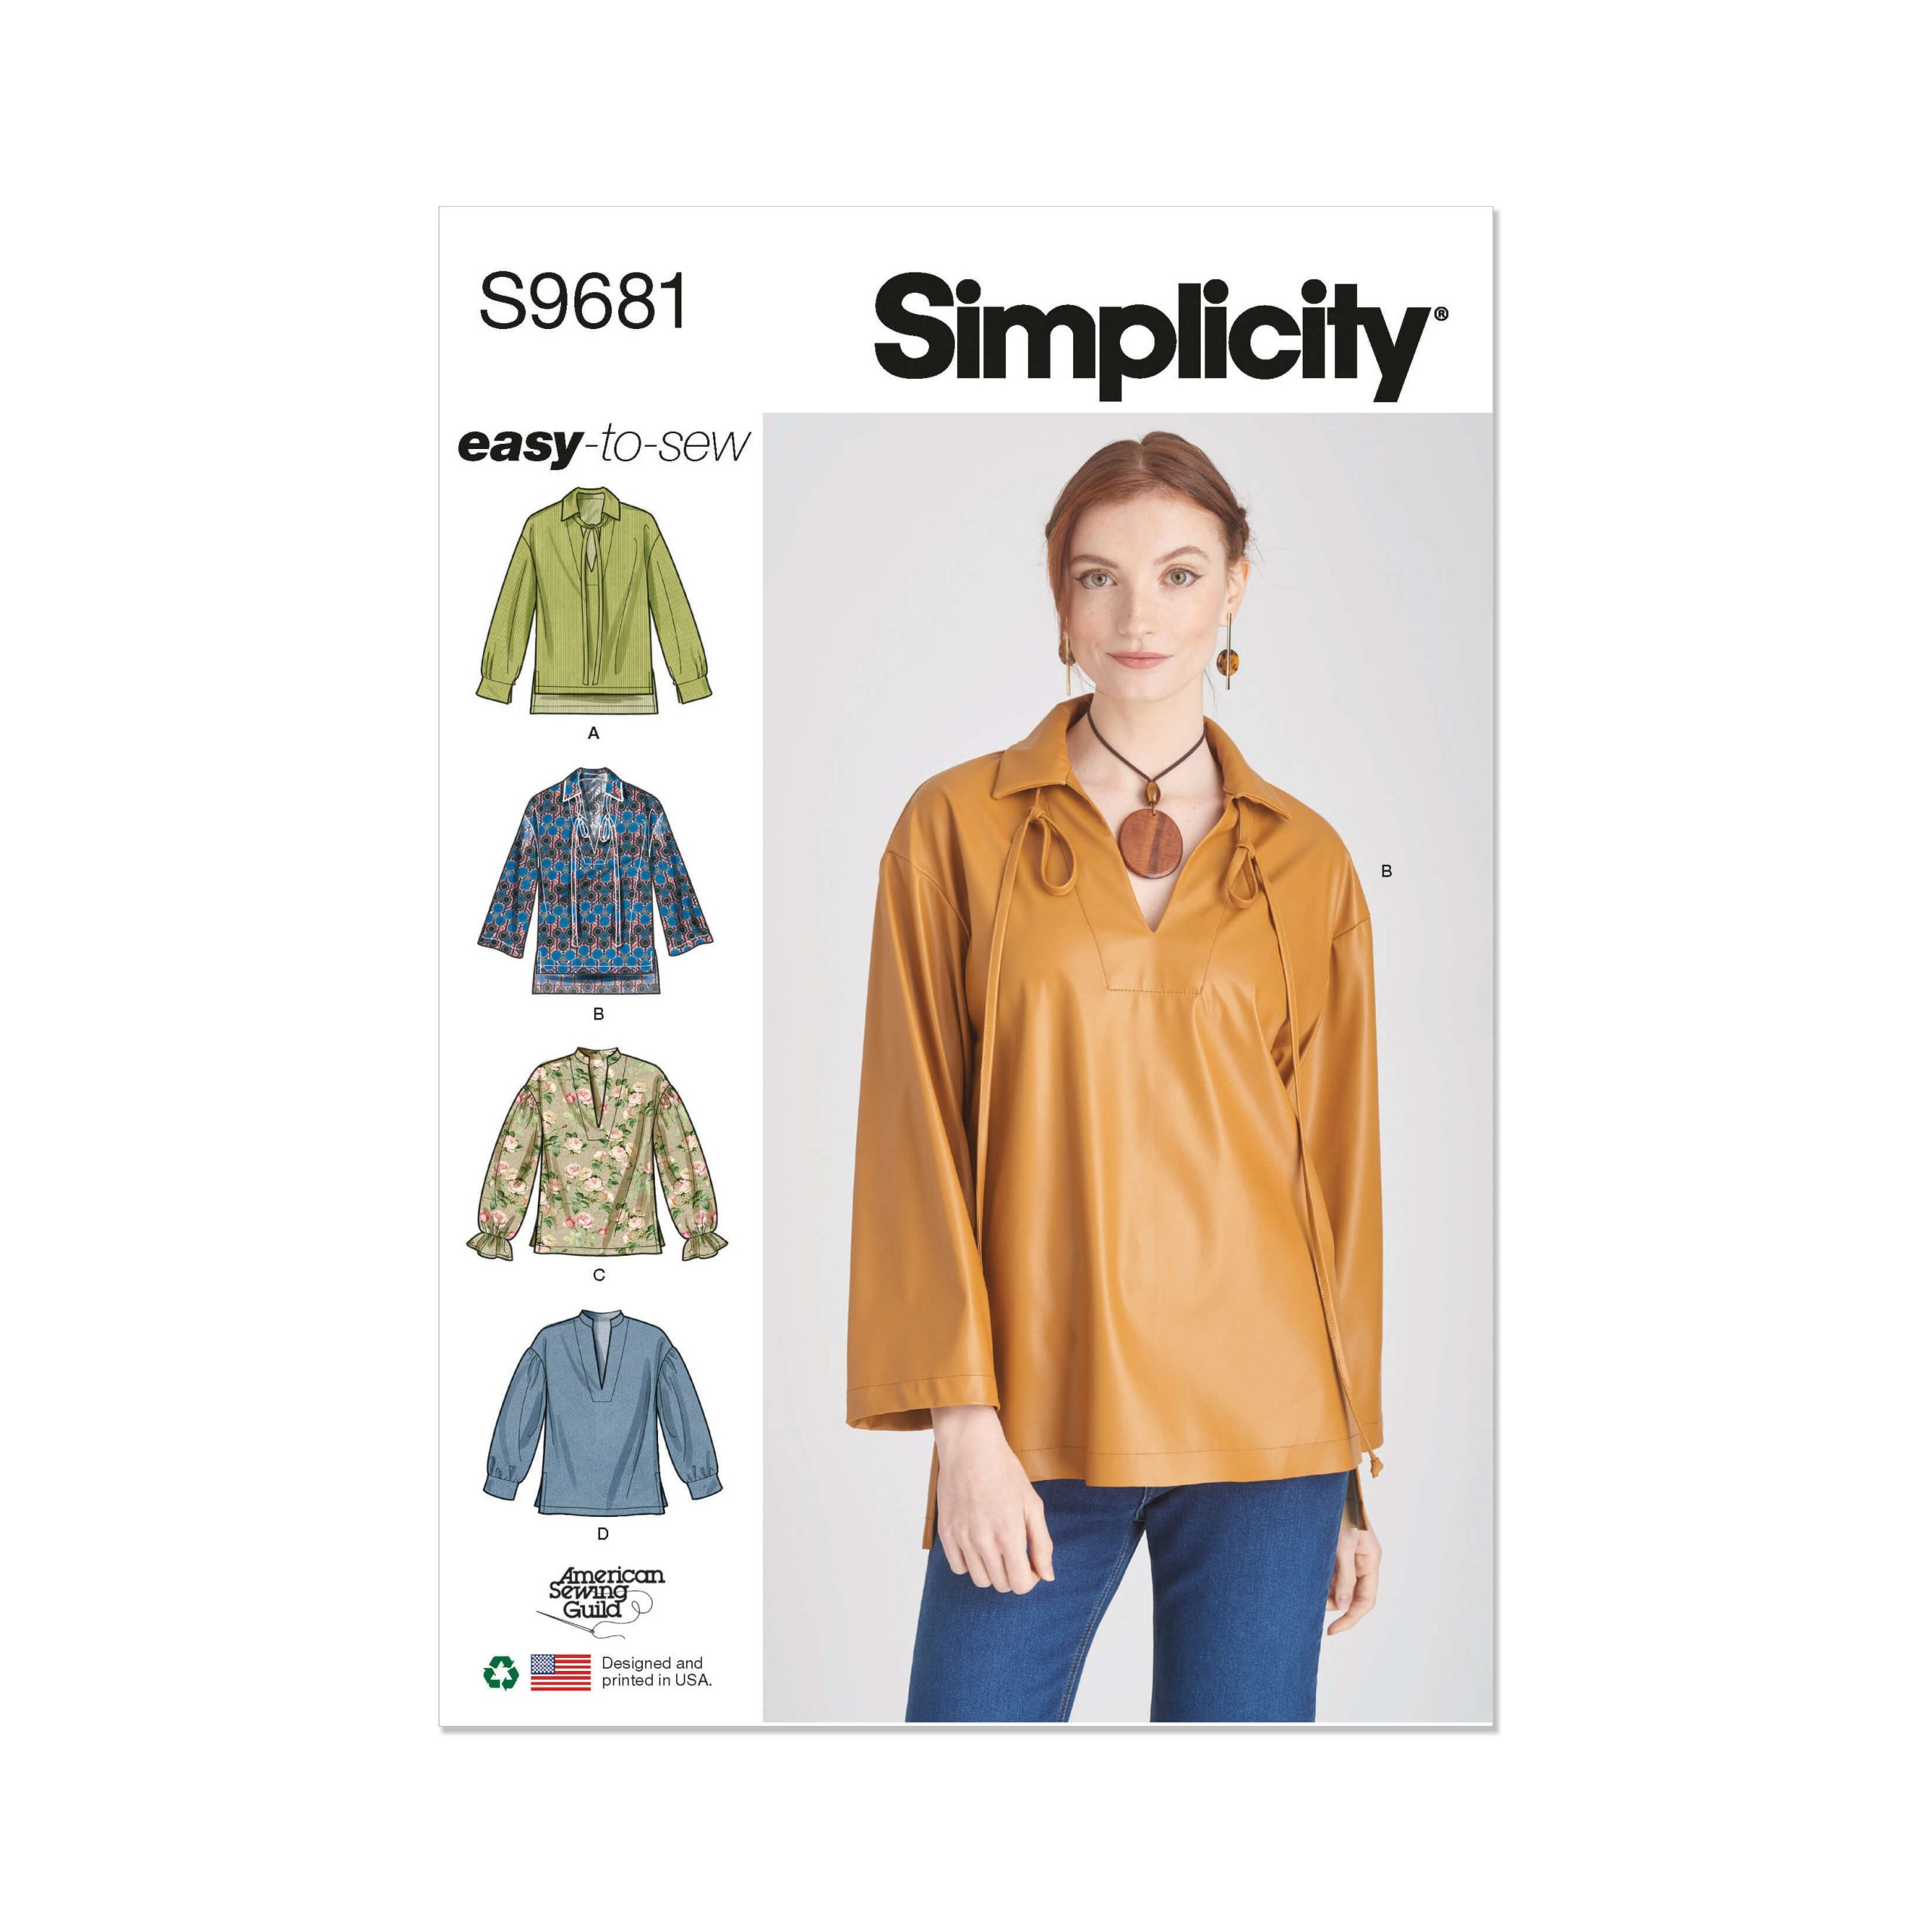 Simplicity Sewing Pattern S9681 Misses' and Women's Pull-Over Top